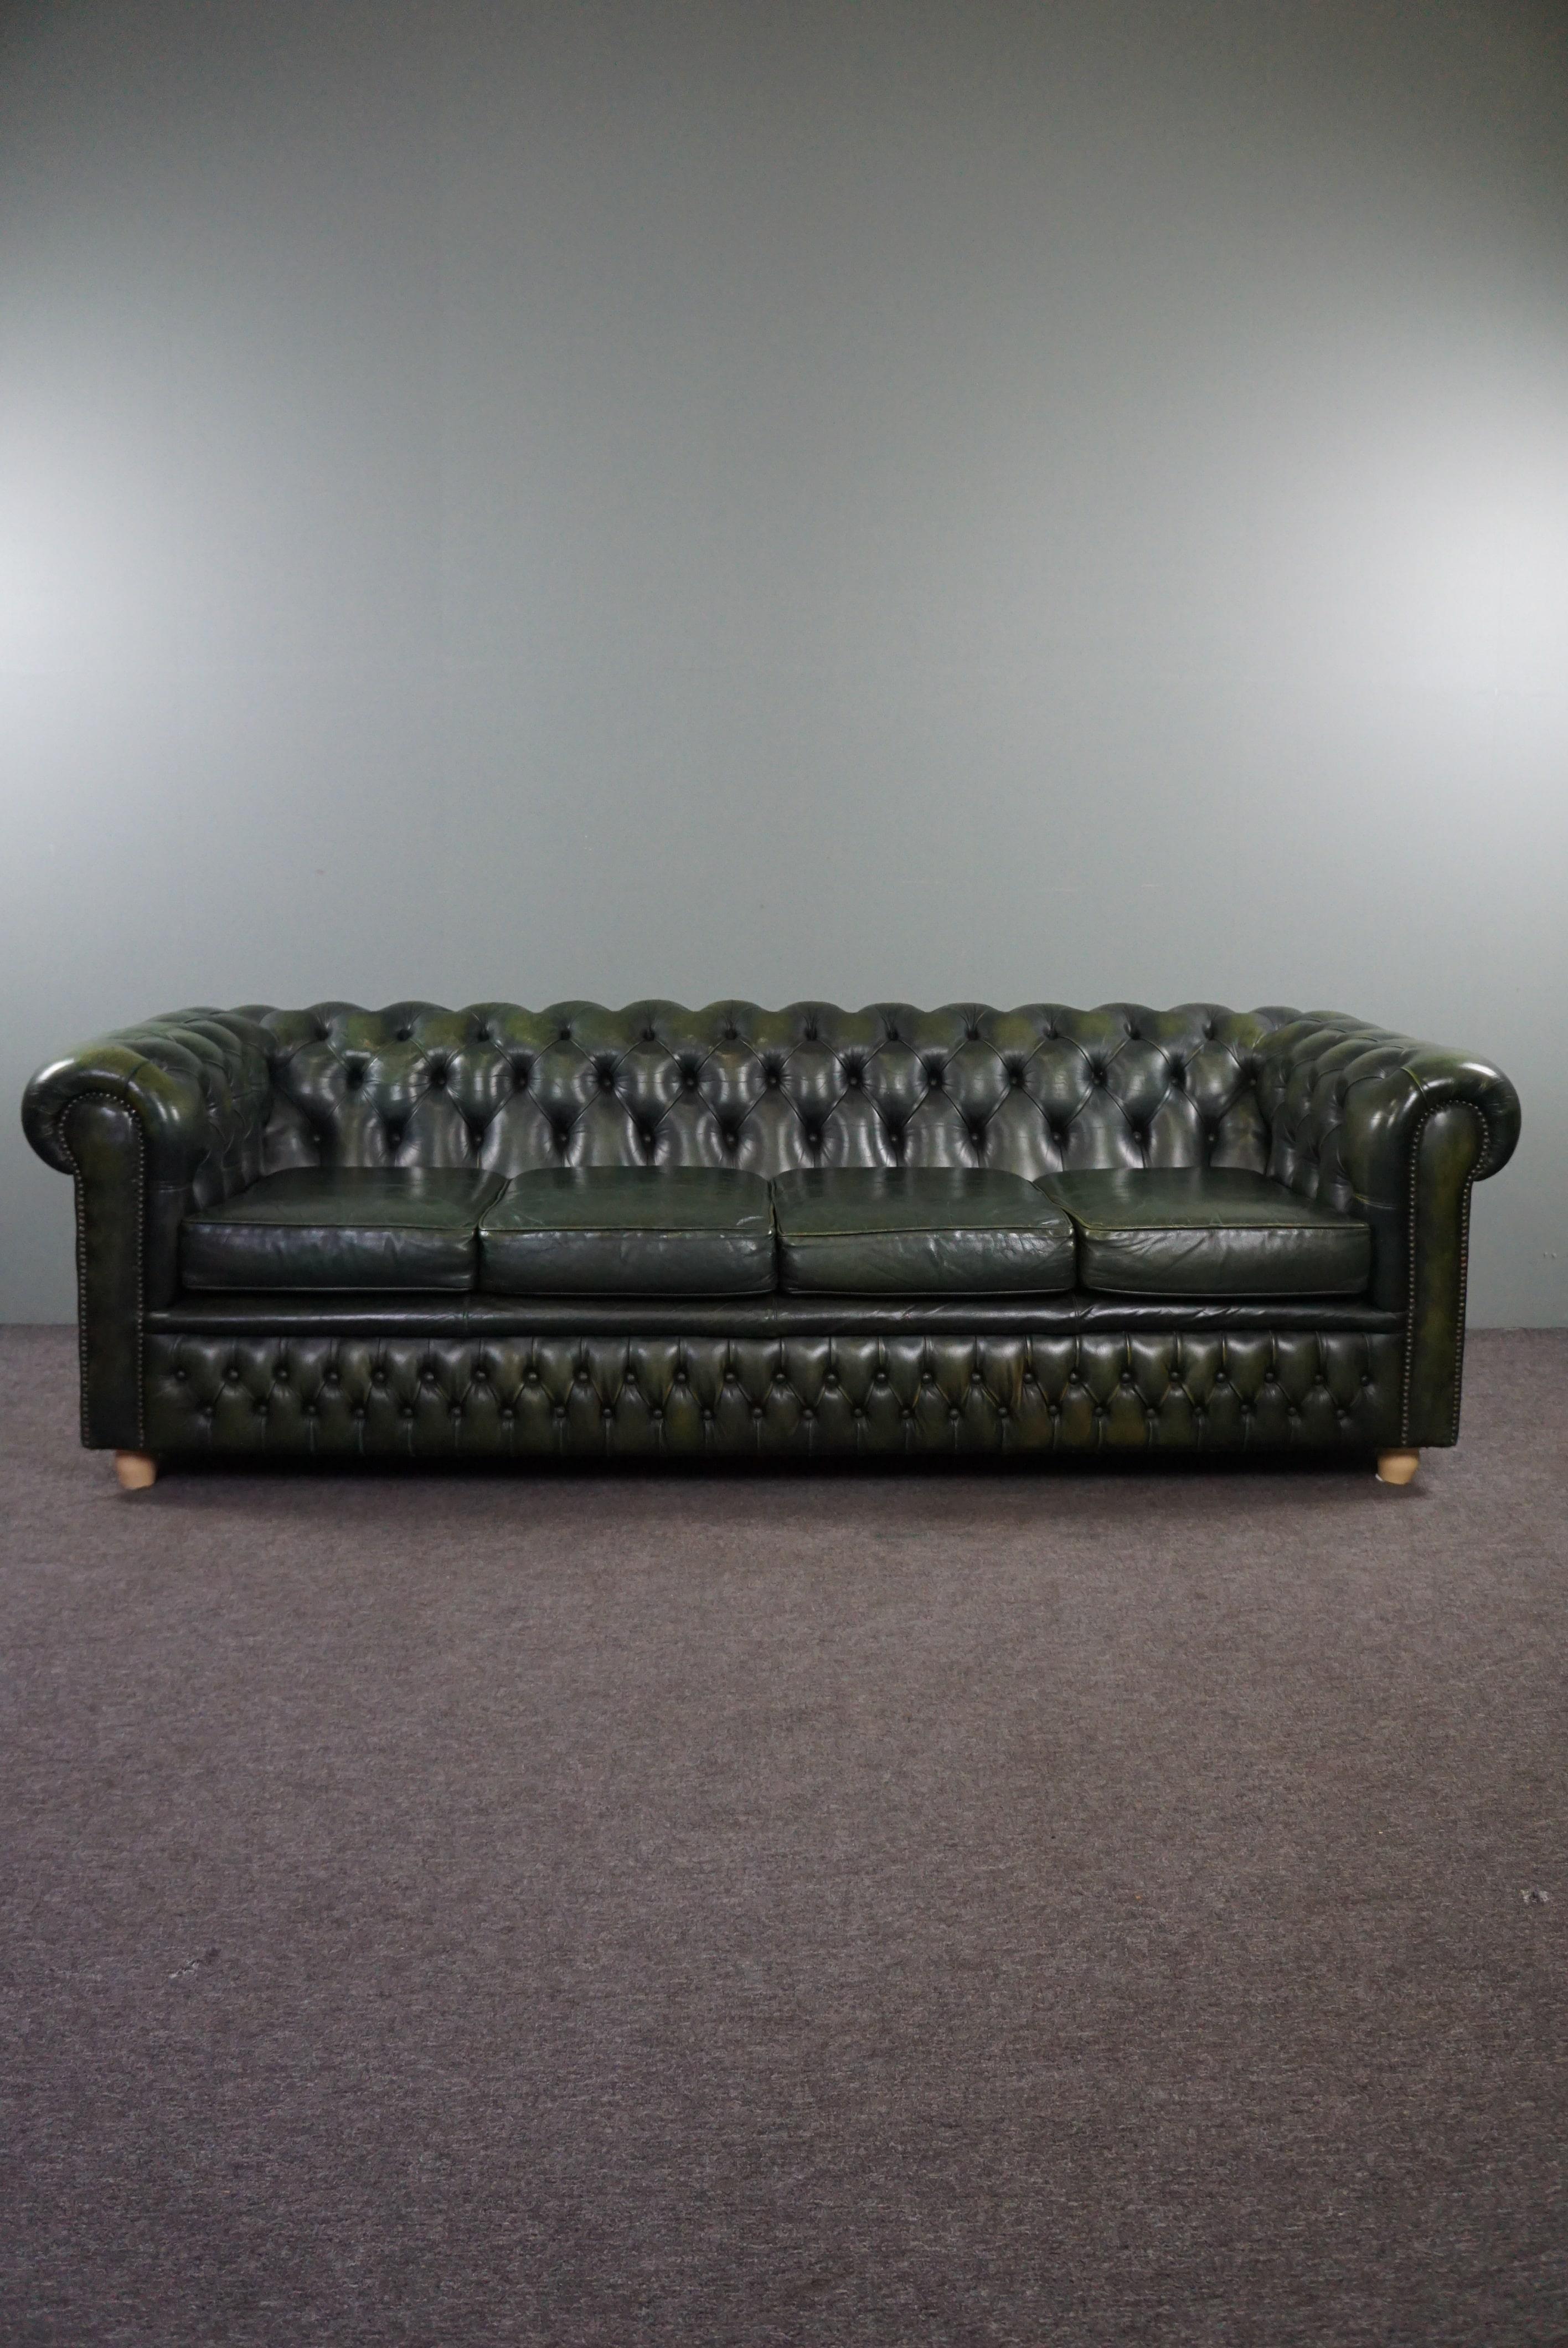 Offered this wonderfully sitting, beautifully colored, spacious cowhide leather 3.5-seater Chesterfield sofa.

This deep colored green Chesterfield sofa has a padded back and armrests and is beautifully finished with decorative nails, which gives it